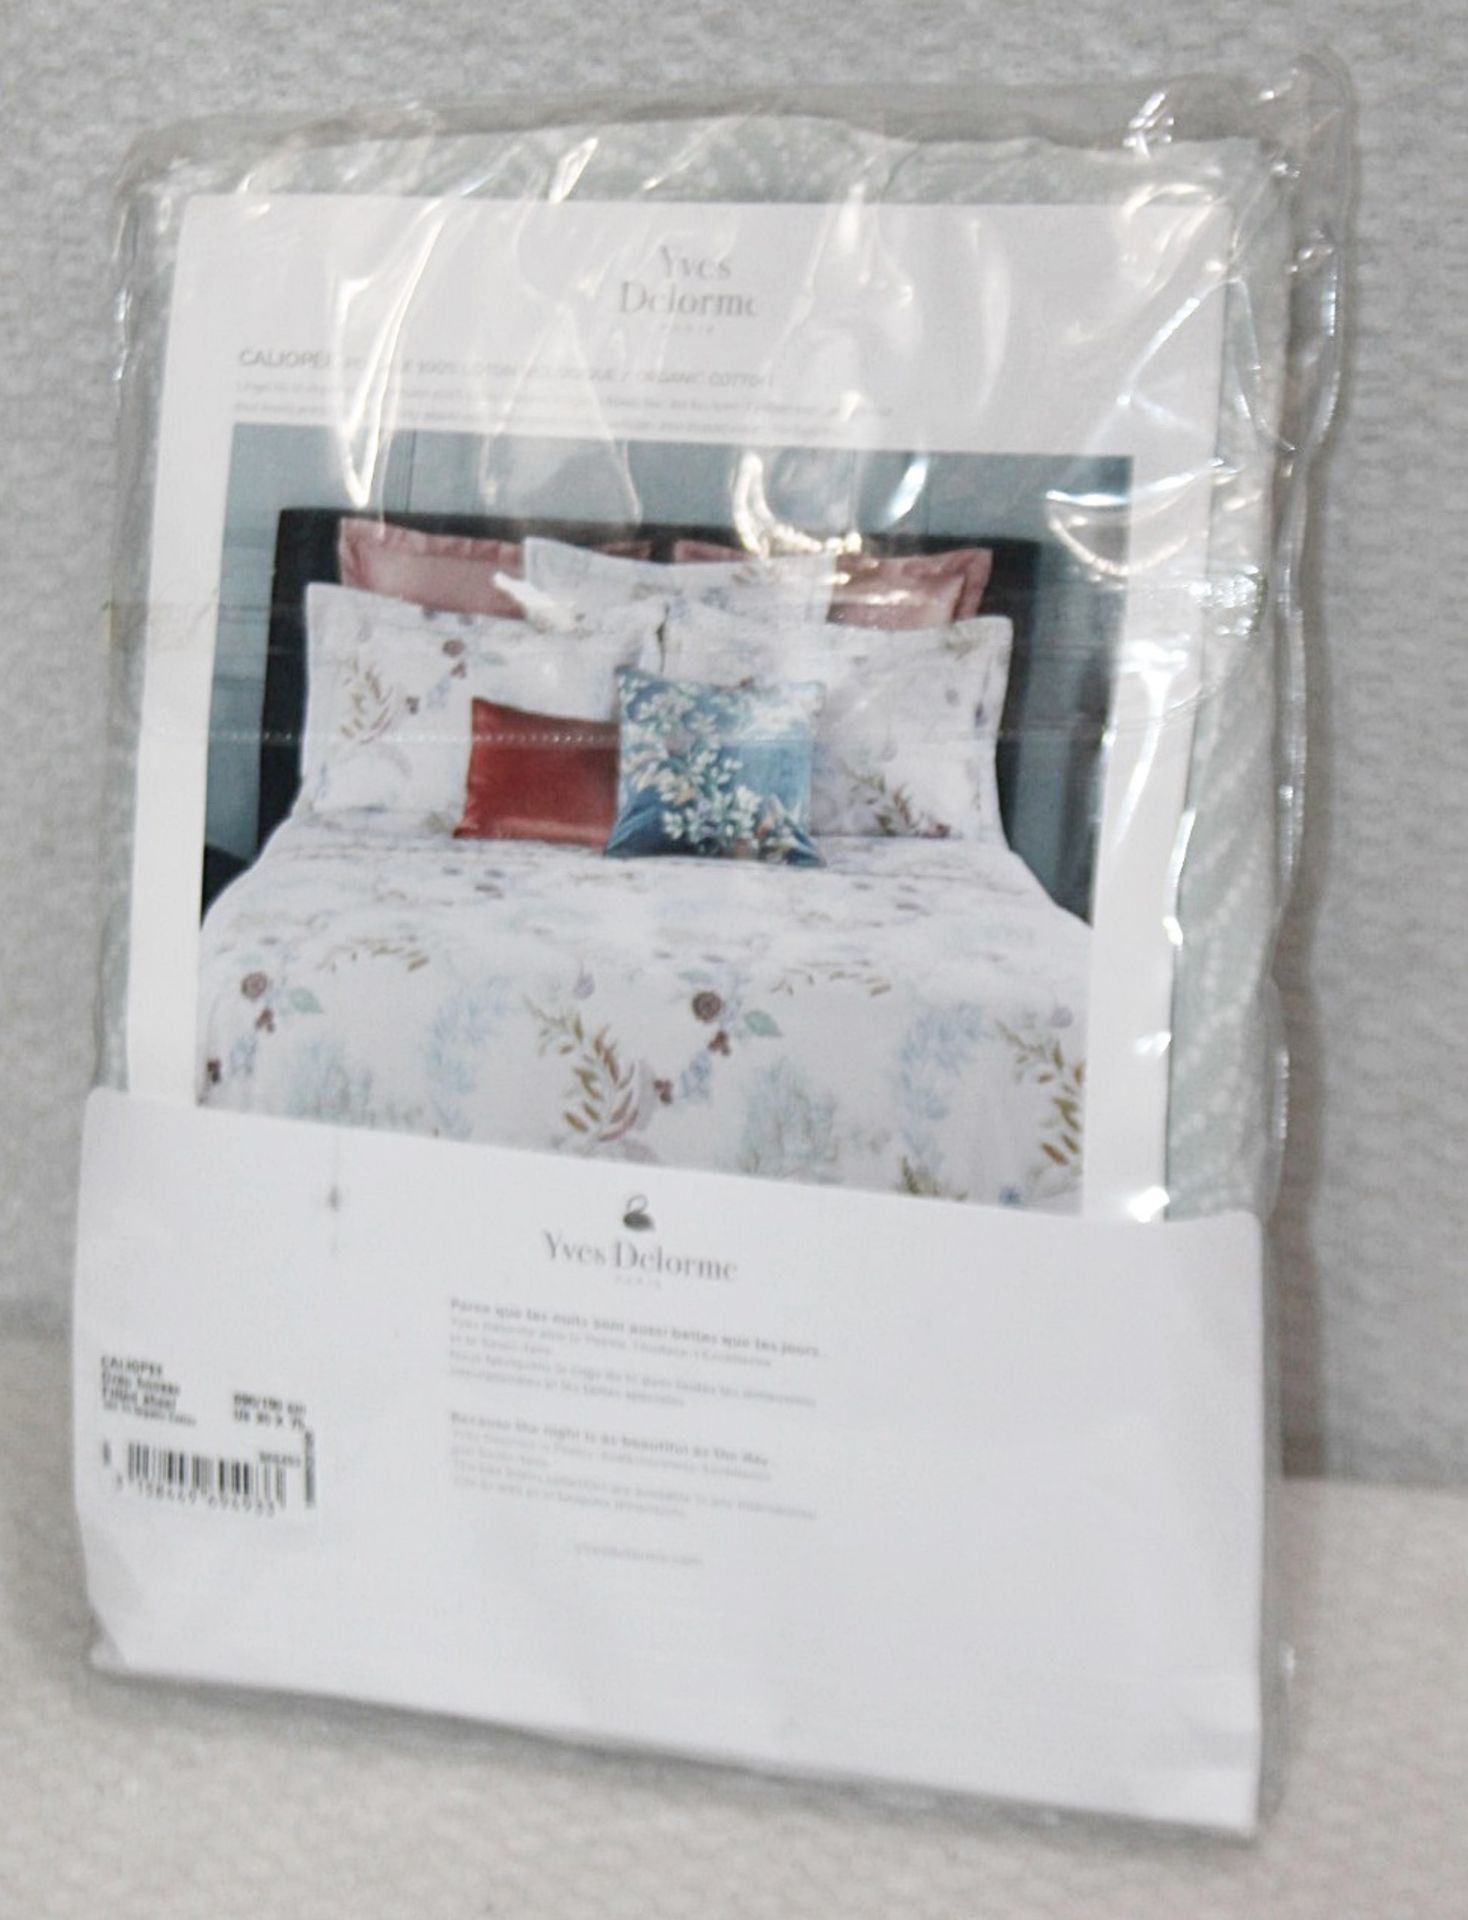 1 x YVES DELORME 'Caliopee' Single 100% Cotton Fitted Sheet (90cm x 190cm) - Unused Stock - Image 5 of 5